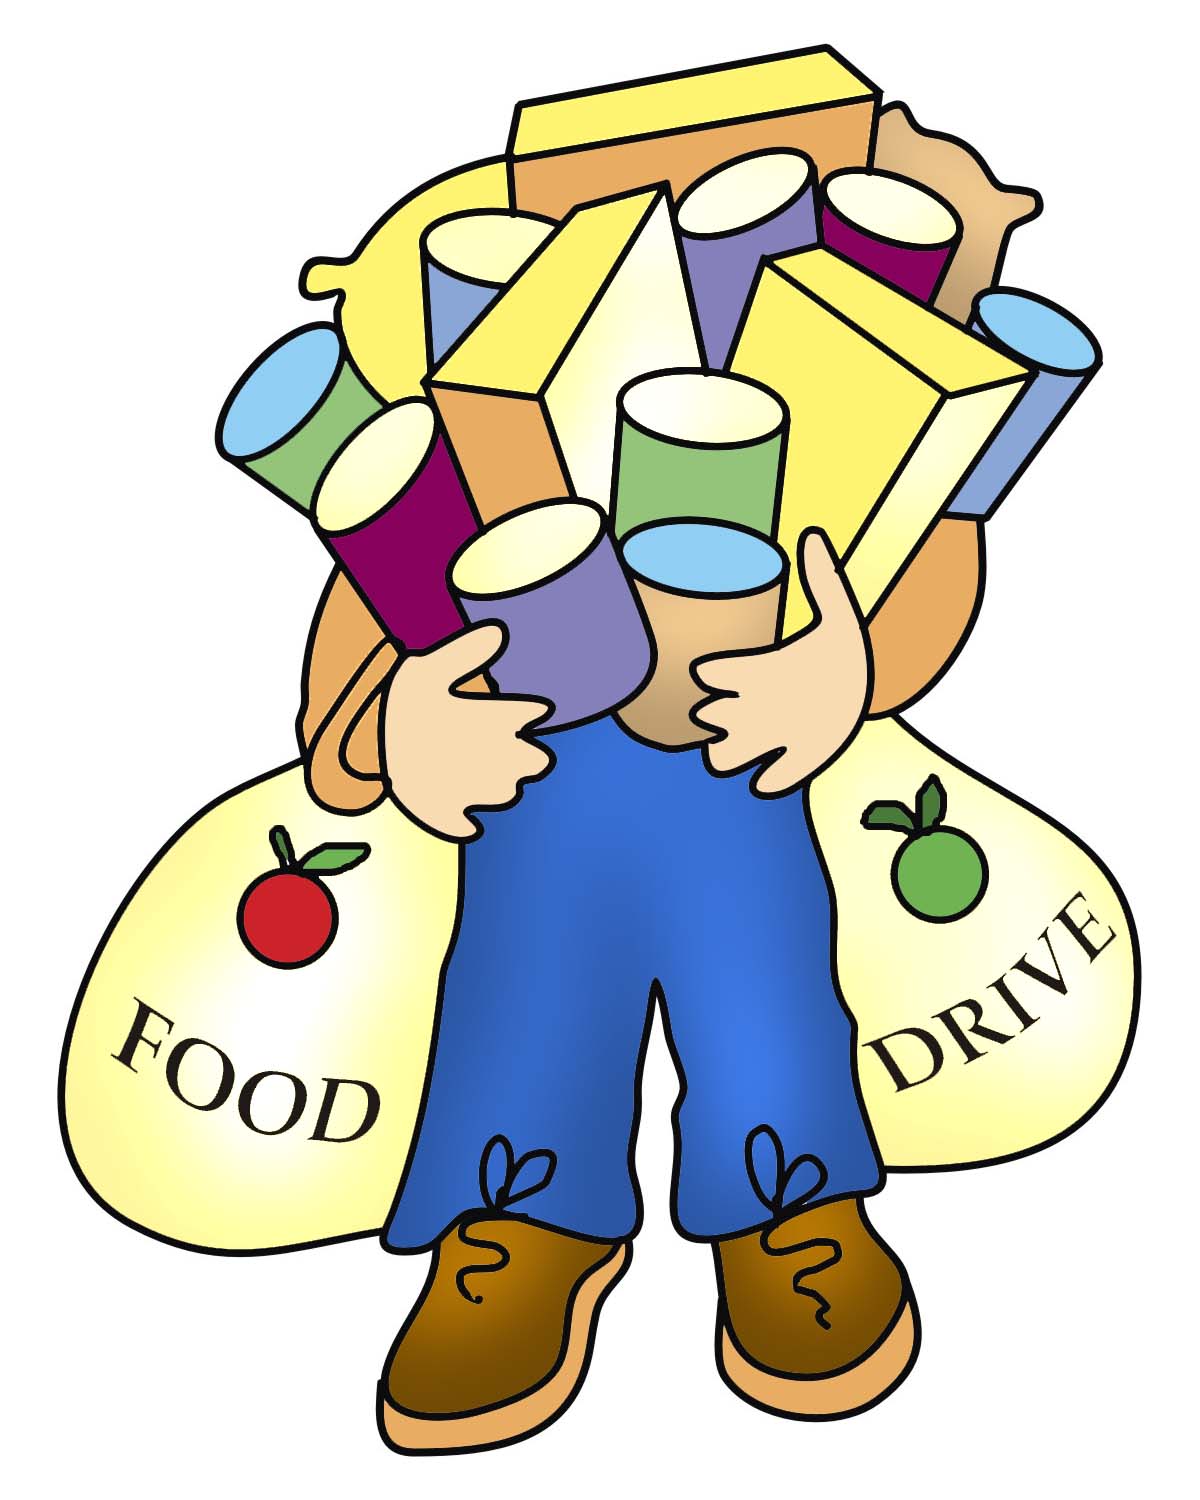 Can Food Clipart